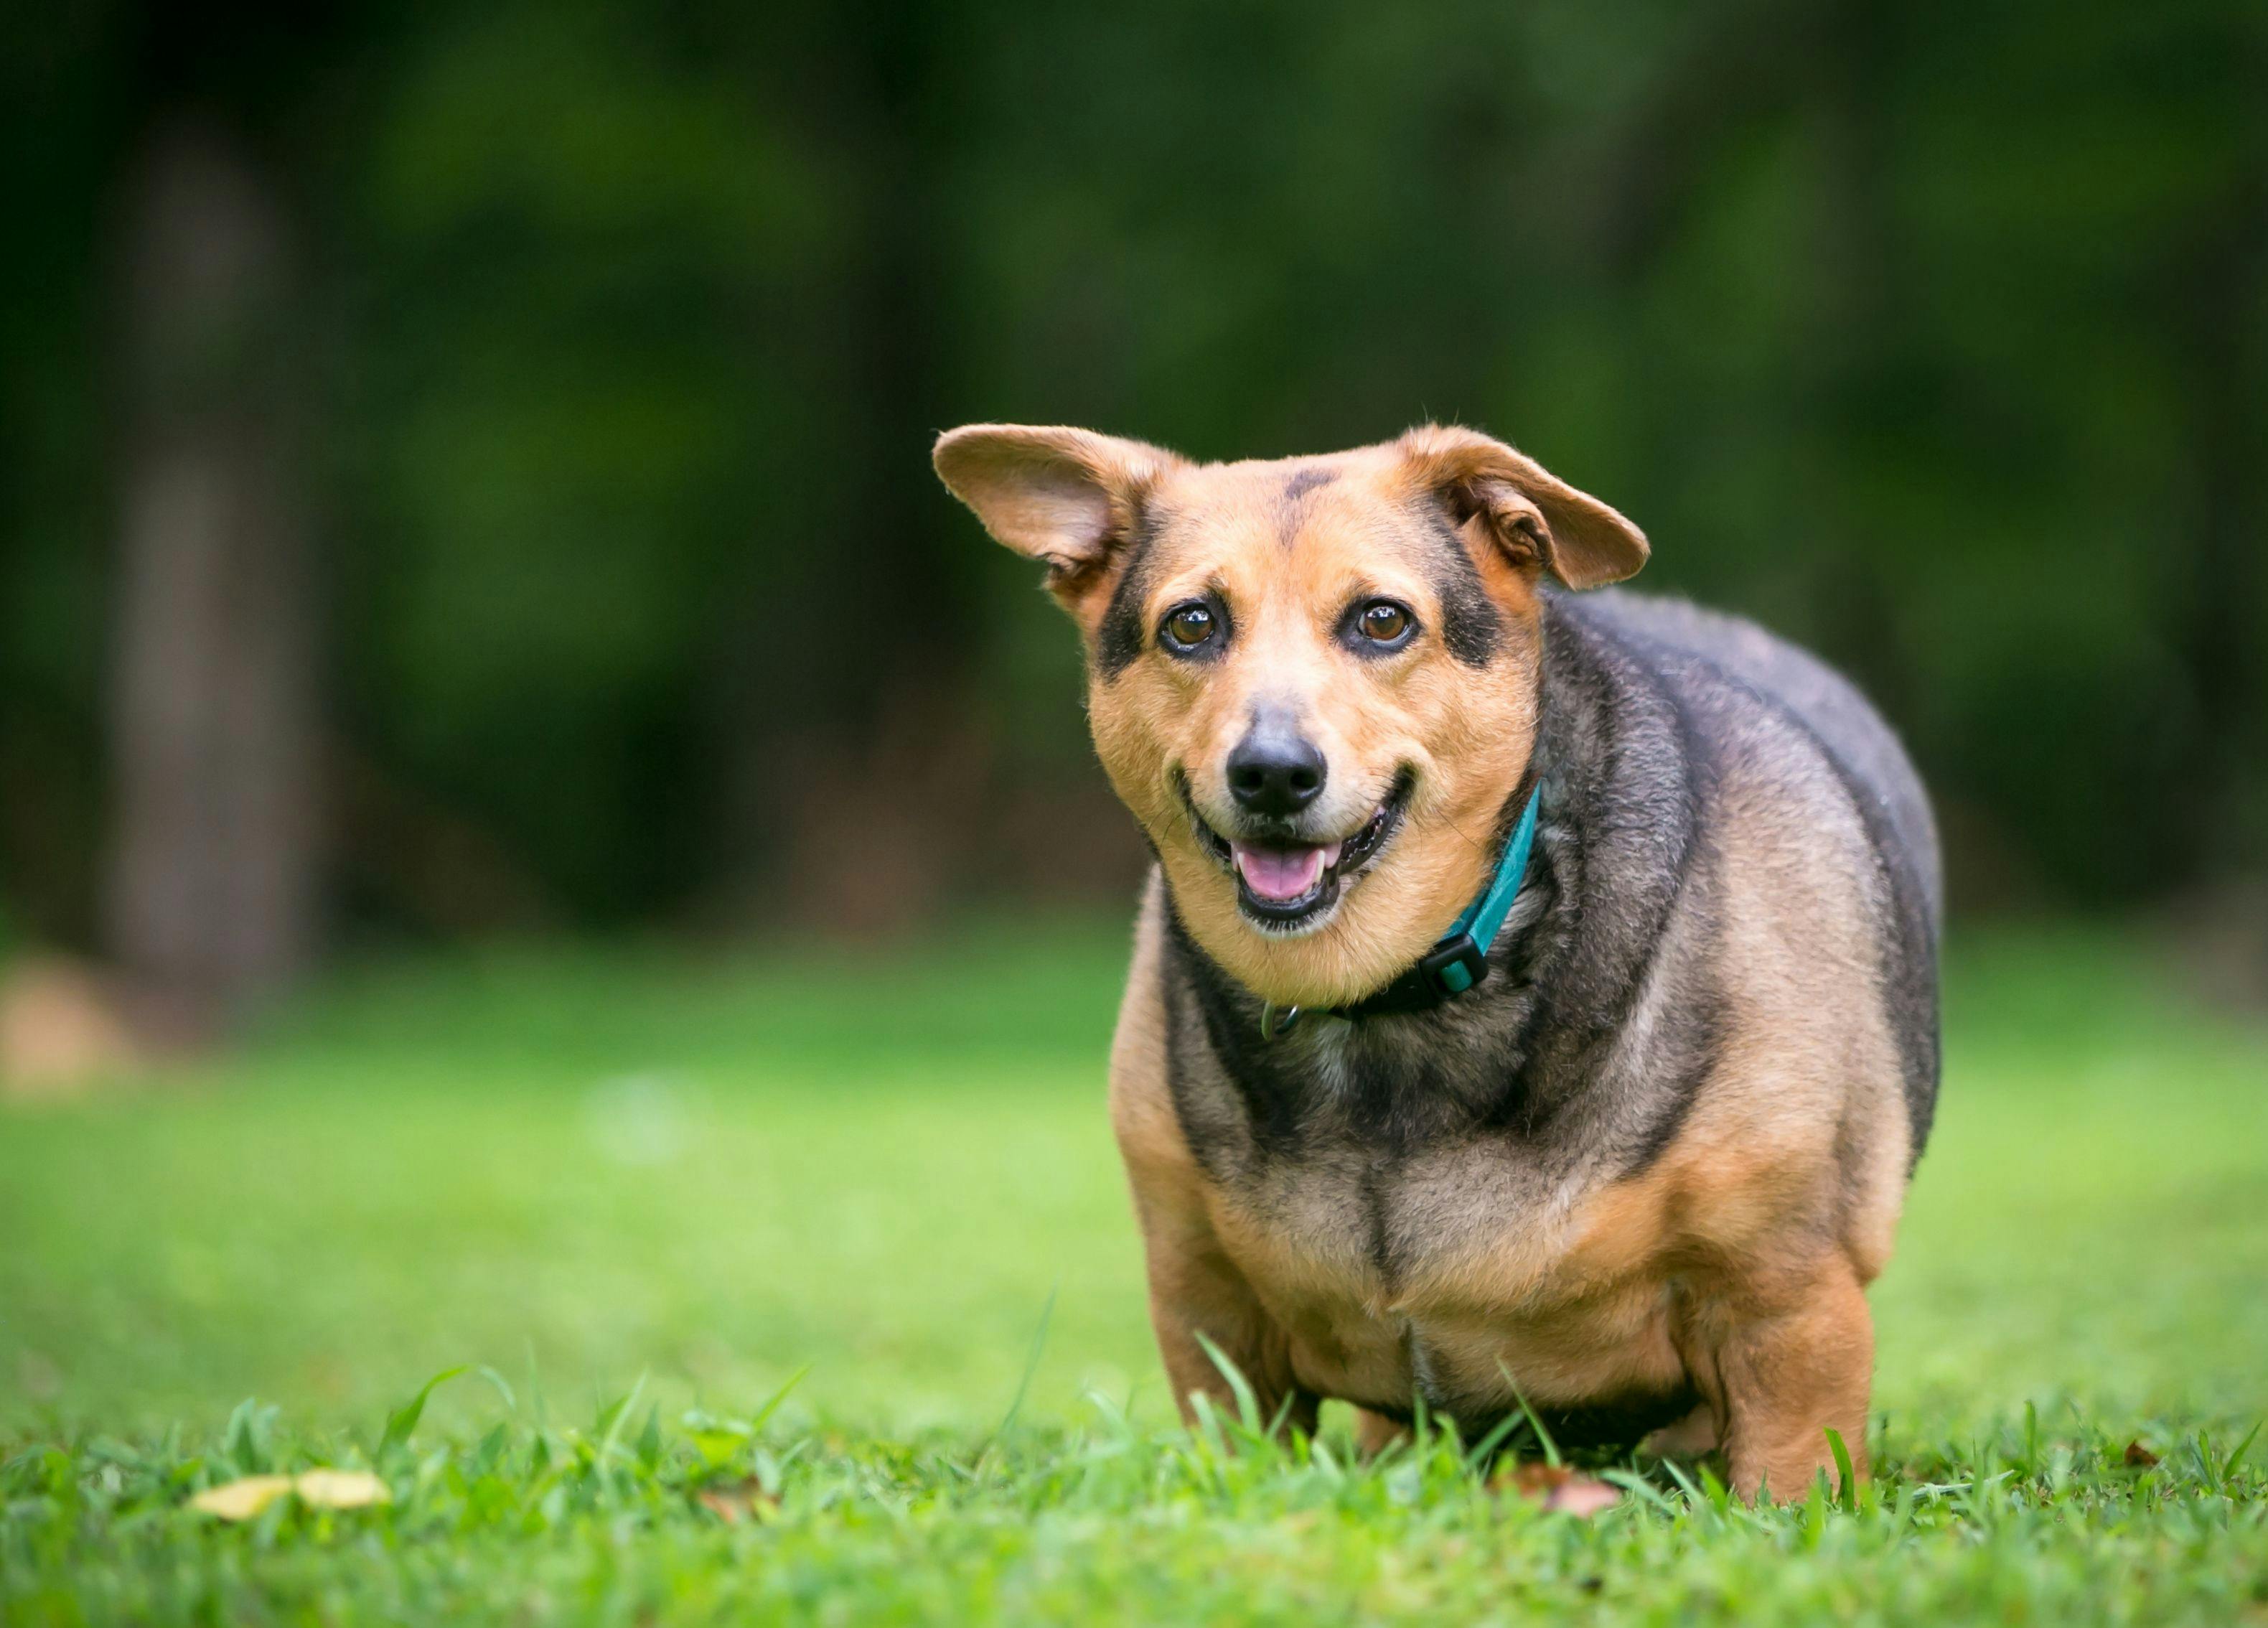 Short lifespans for pets can compel clients to act on obesity, researchers discover 